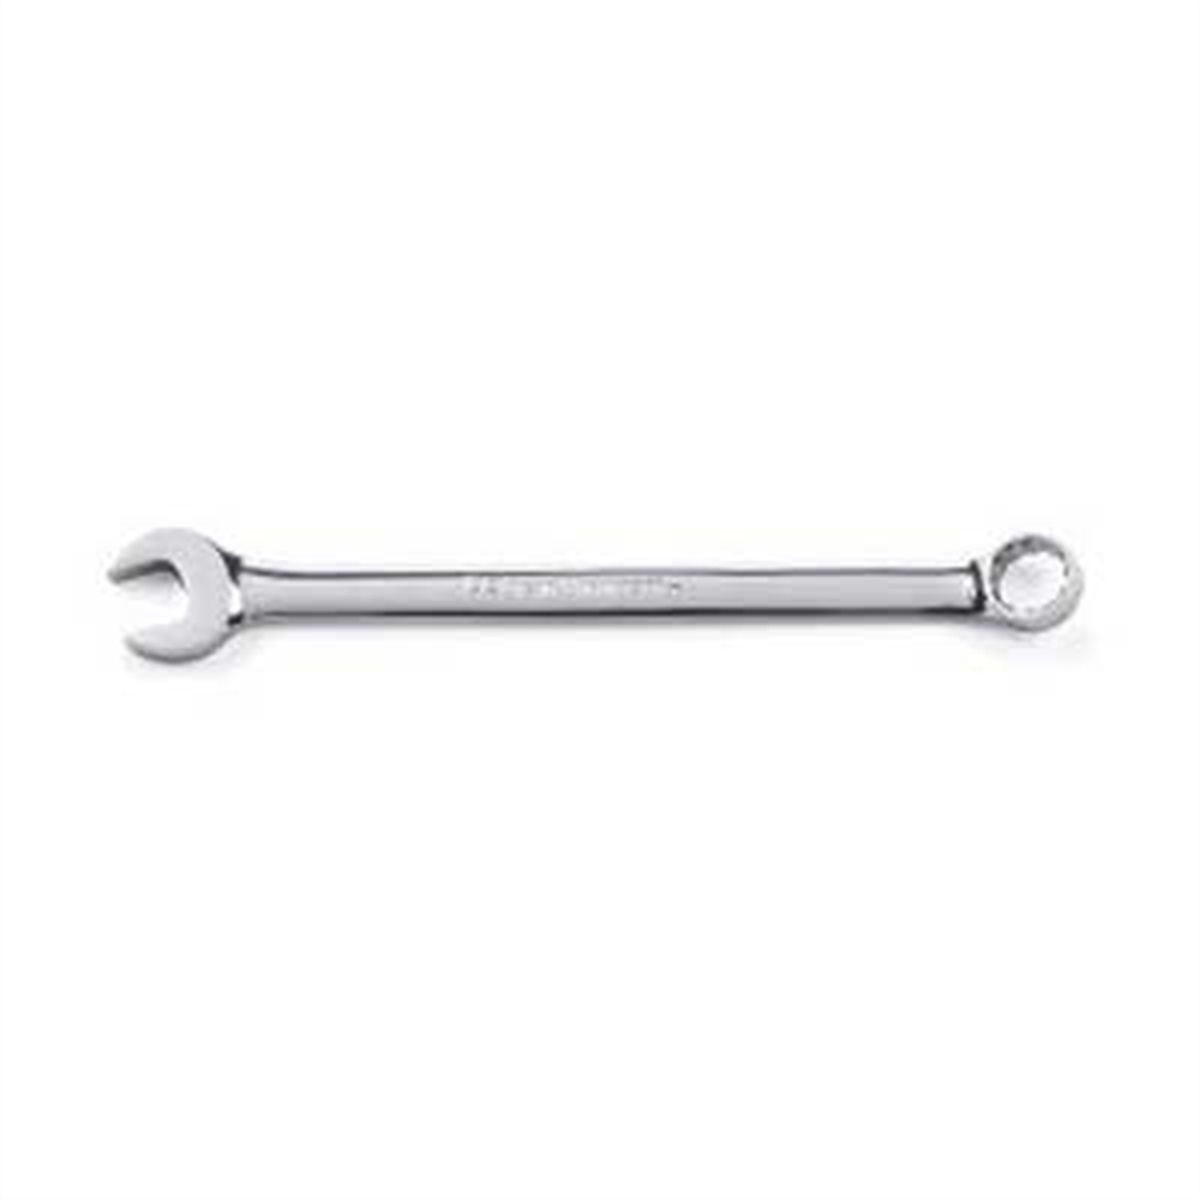 15 mm 12 Pt. Non-Ratcheting Combination Wrench